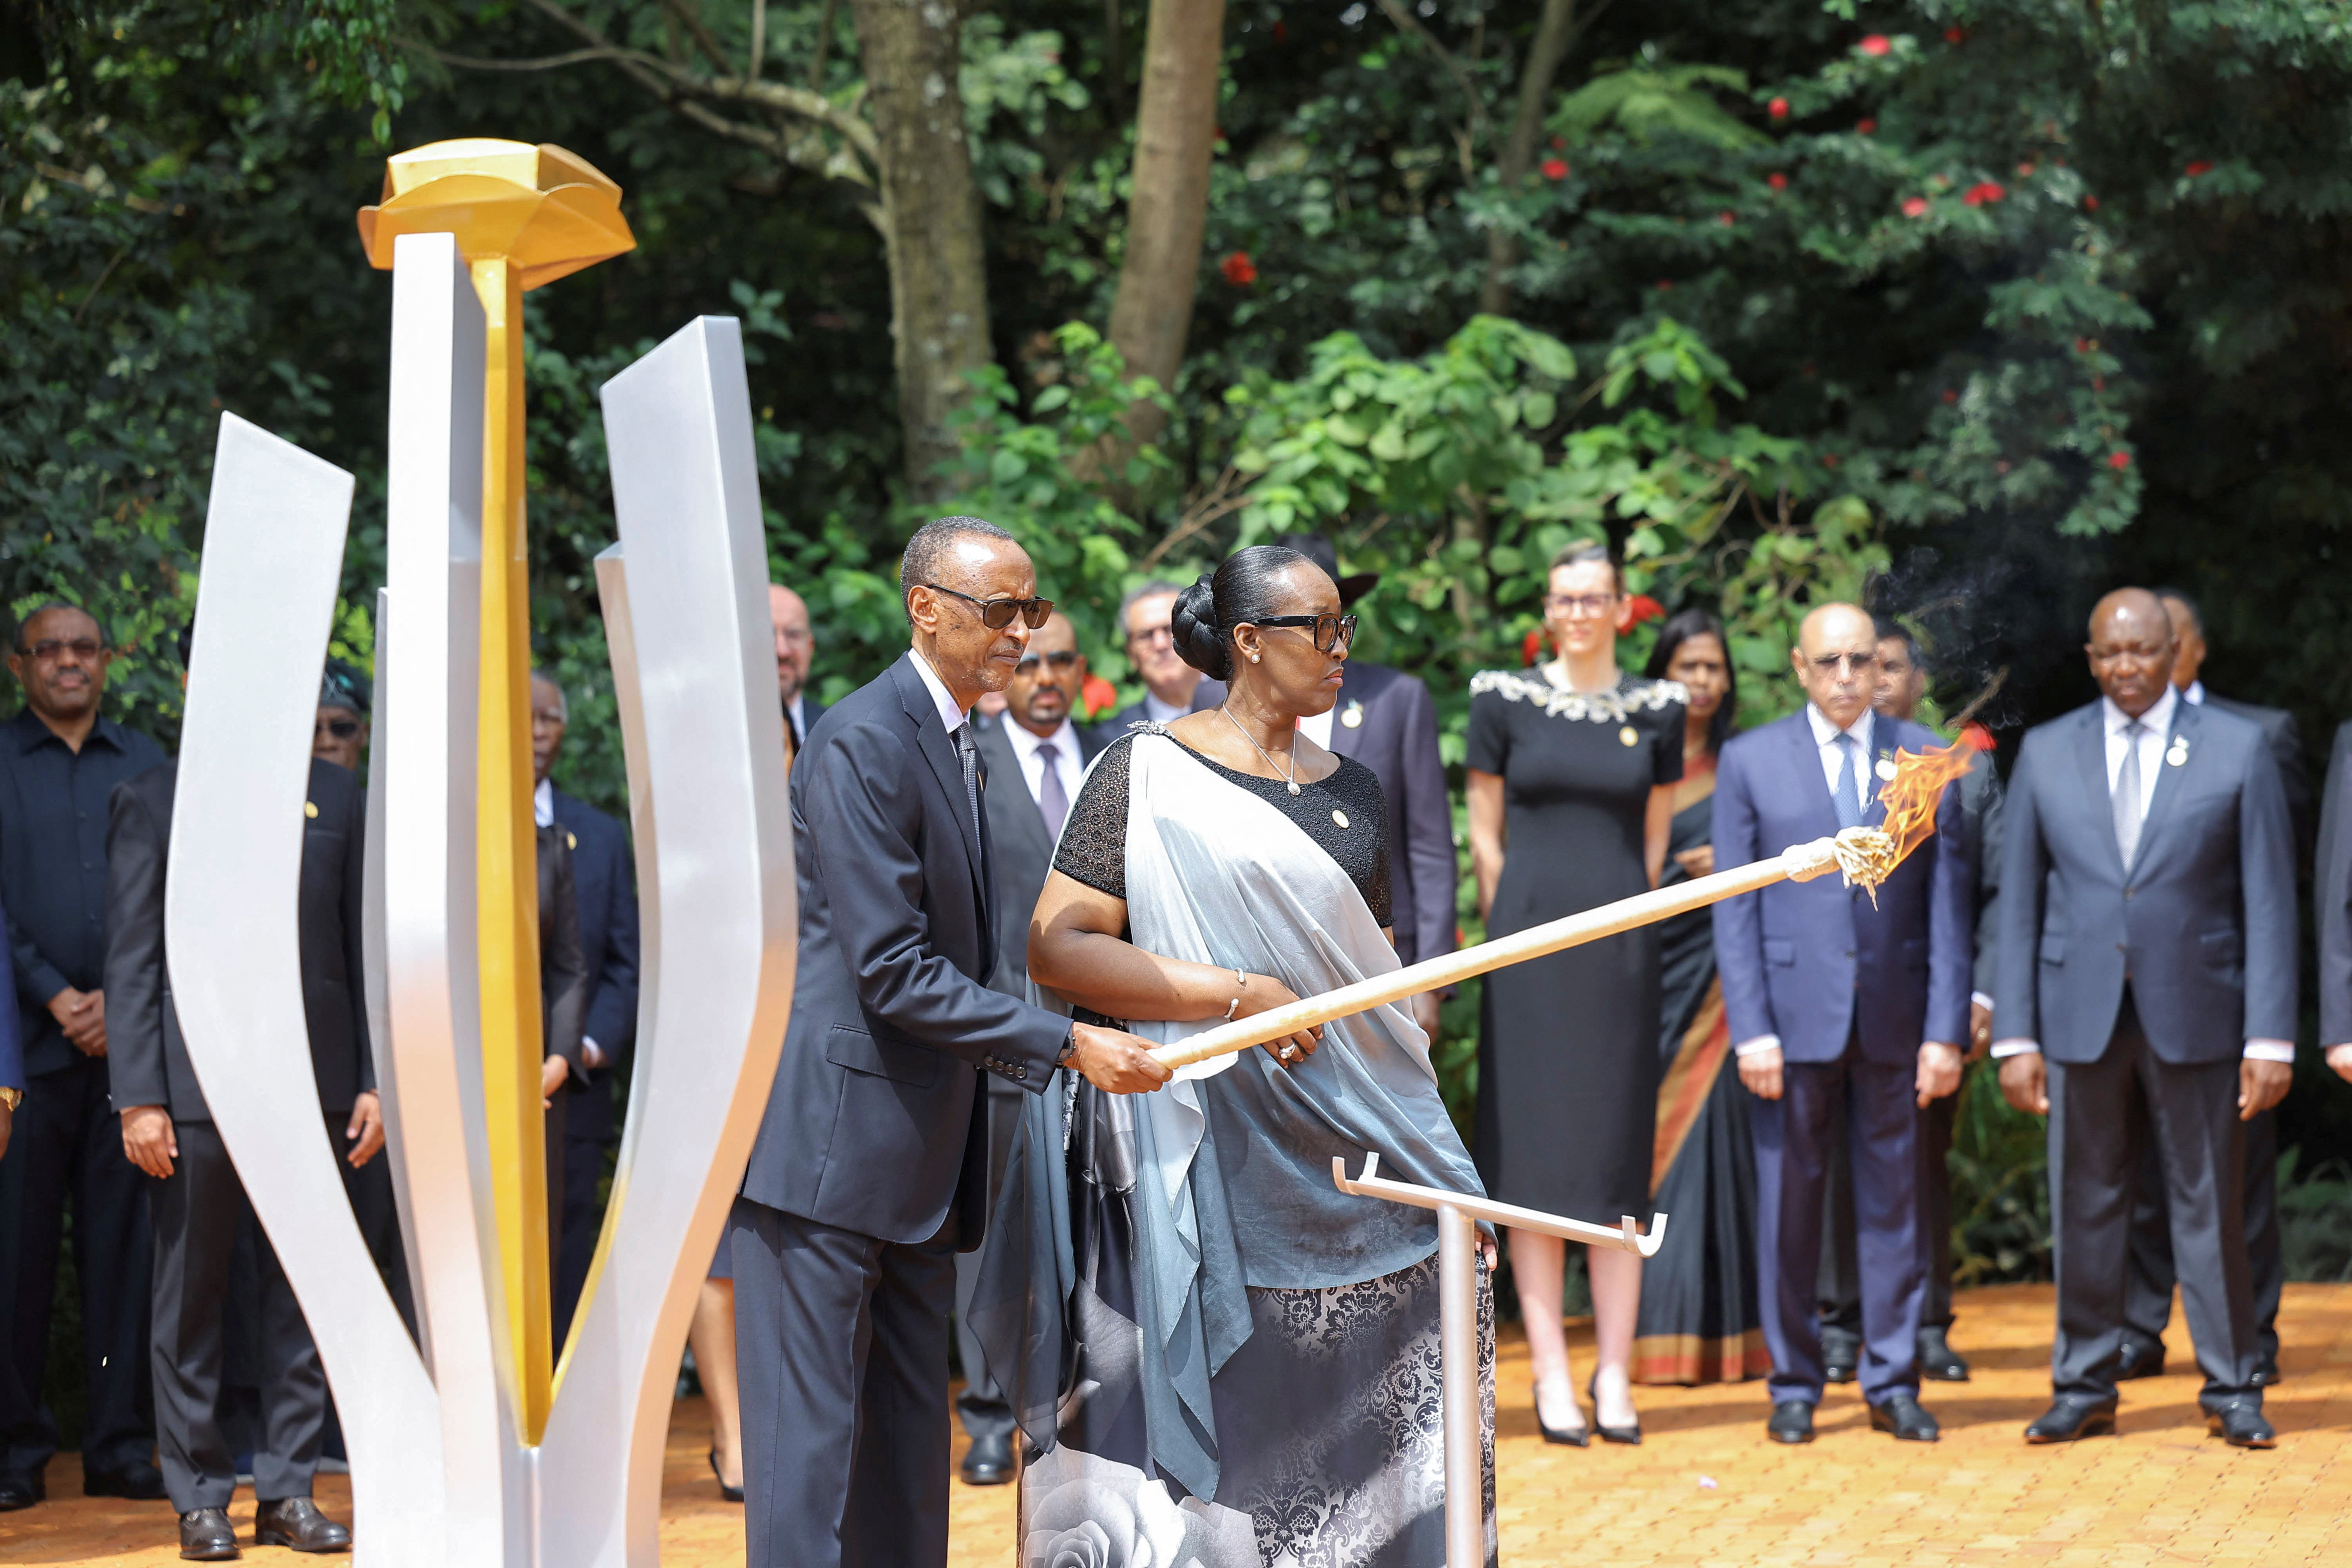 Commemoration of the 1994 Genocide at the Kigali Genocide Memorial Center